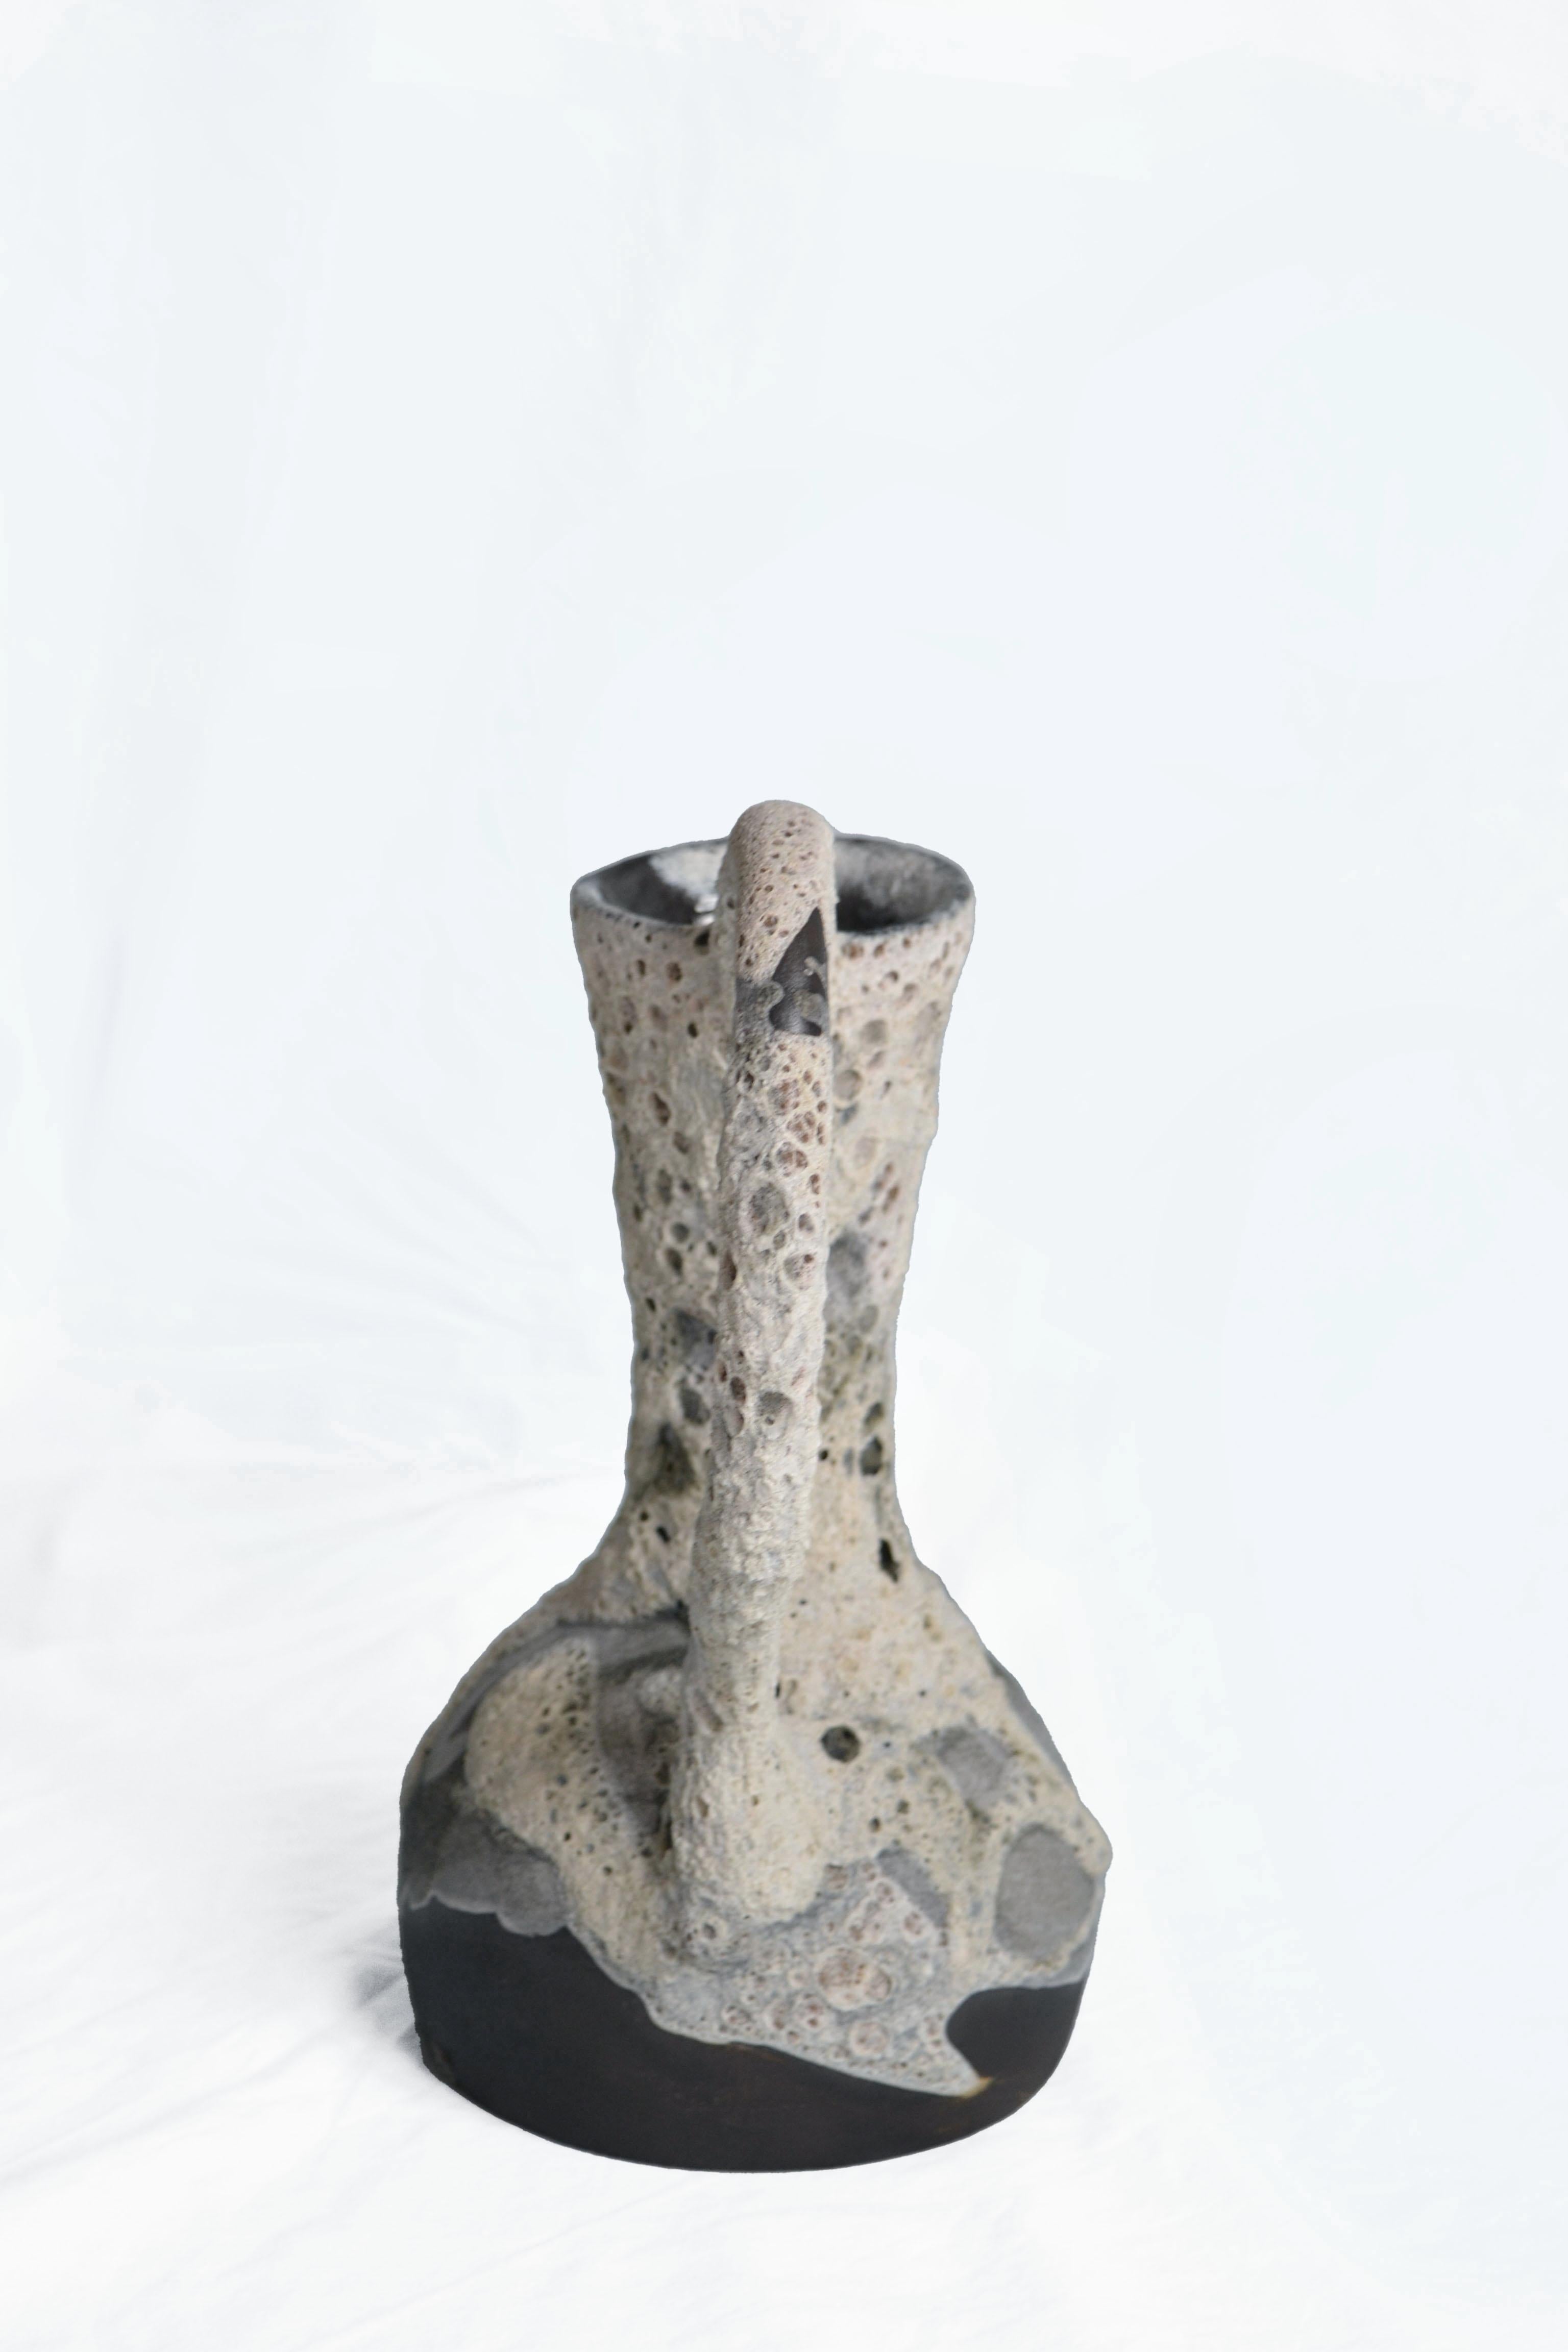 Carafe 6 vase by Anna Karountzou
Dimensions: W 21.5 x D 15 x H 30 cm
Materials: black stoneware clay, clear glaze inside, handmade crater glaze outside, fired at 1220

Born and based in Athens, Greece, with a background in conservation of works